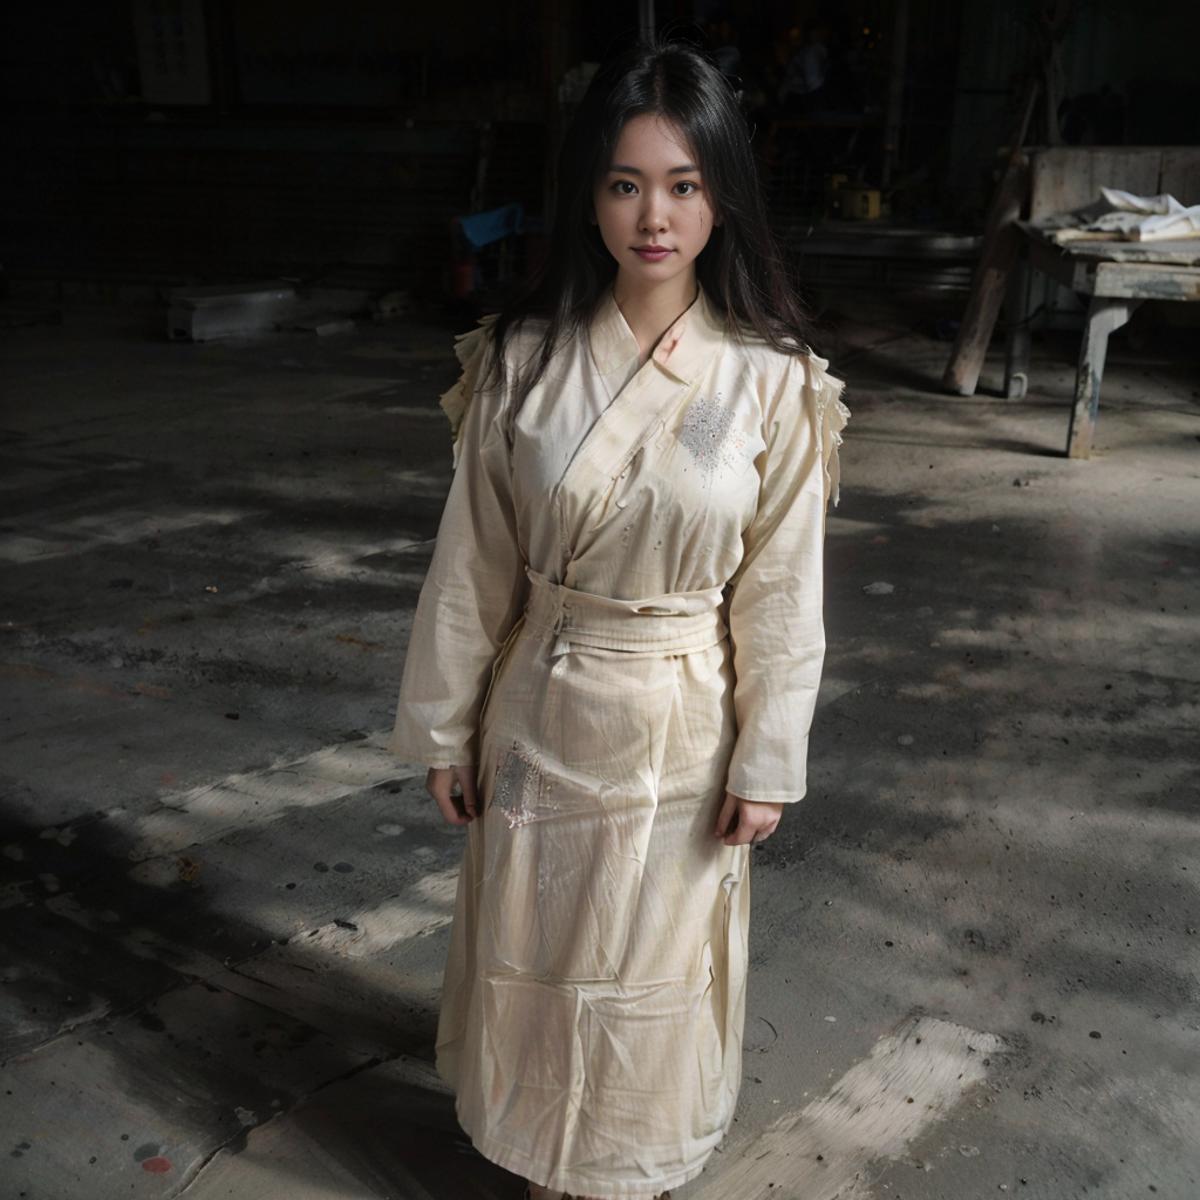 Taiwanese funeral clothing image by 7533967